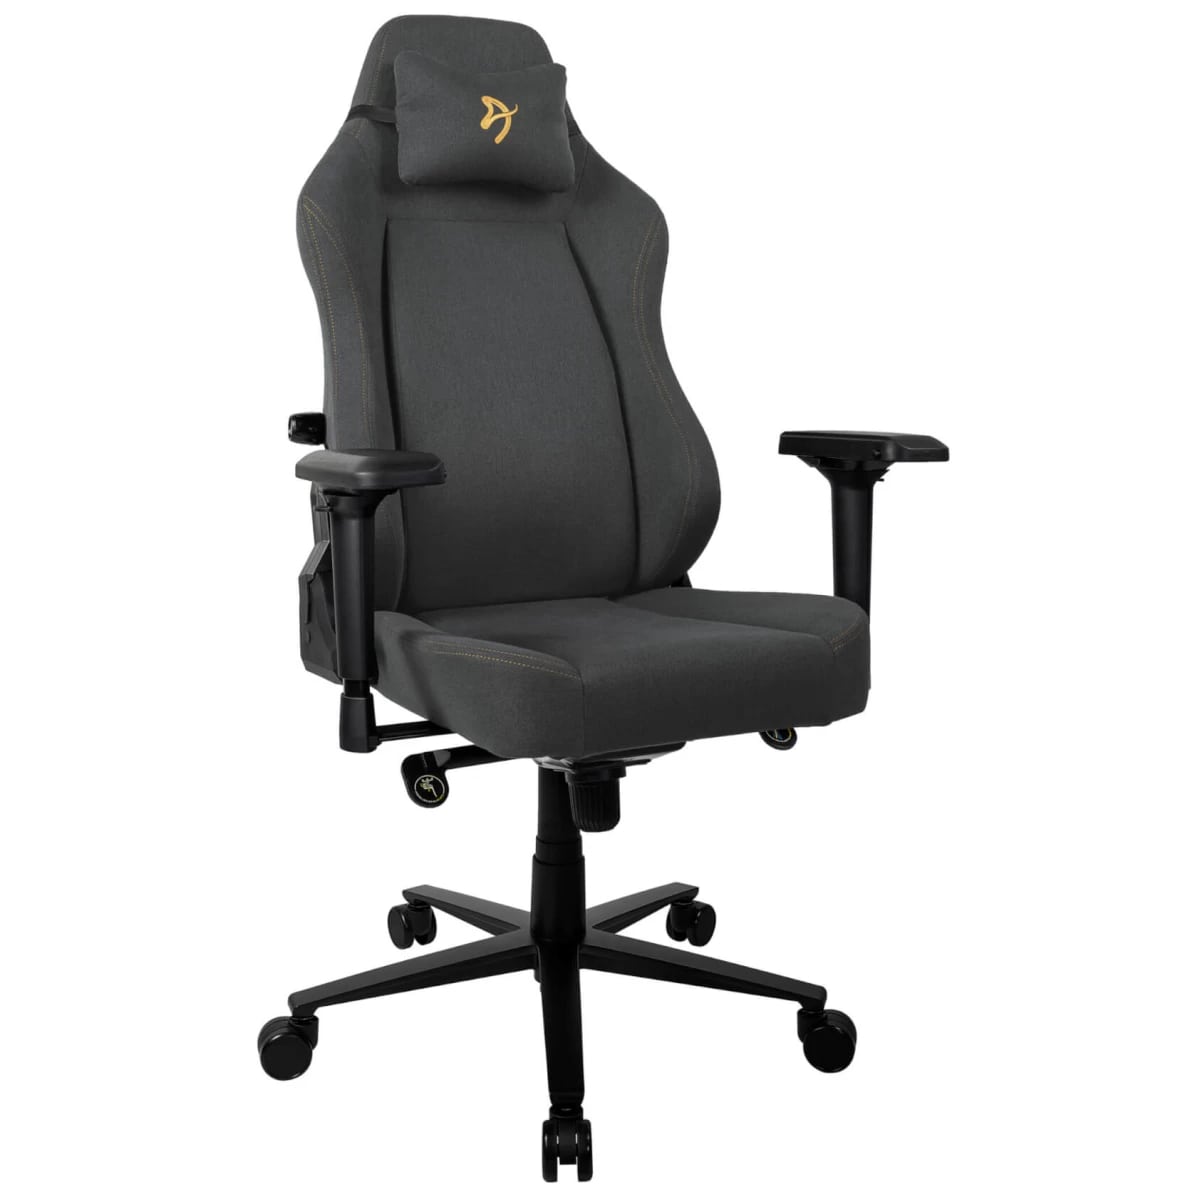 Arozzi Primo Woven Fabric Gaming Desk Chair - Black with Gold Logo